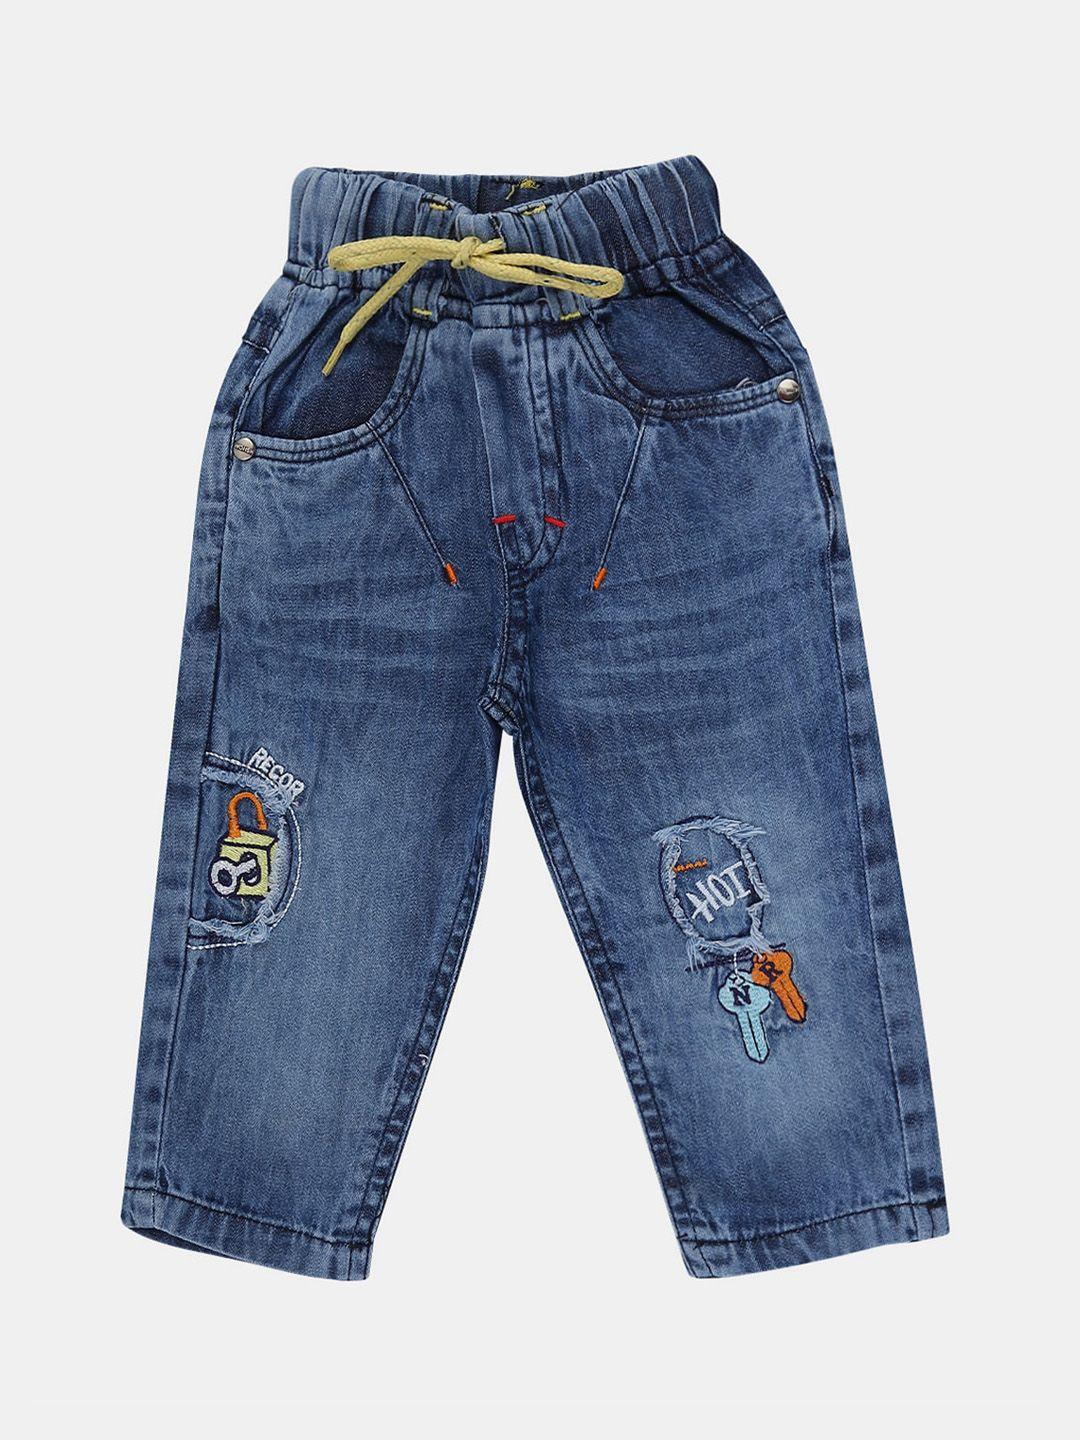 v-mart kids classic mildly distressed light fade cotton jeans